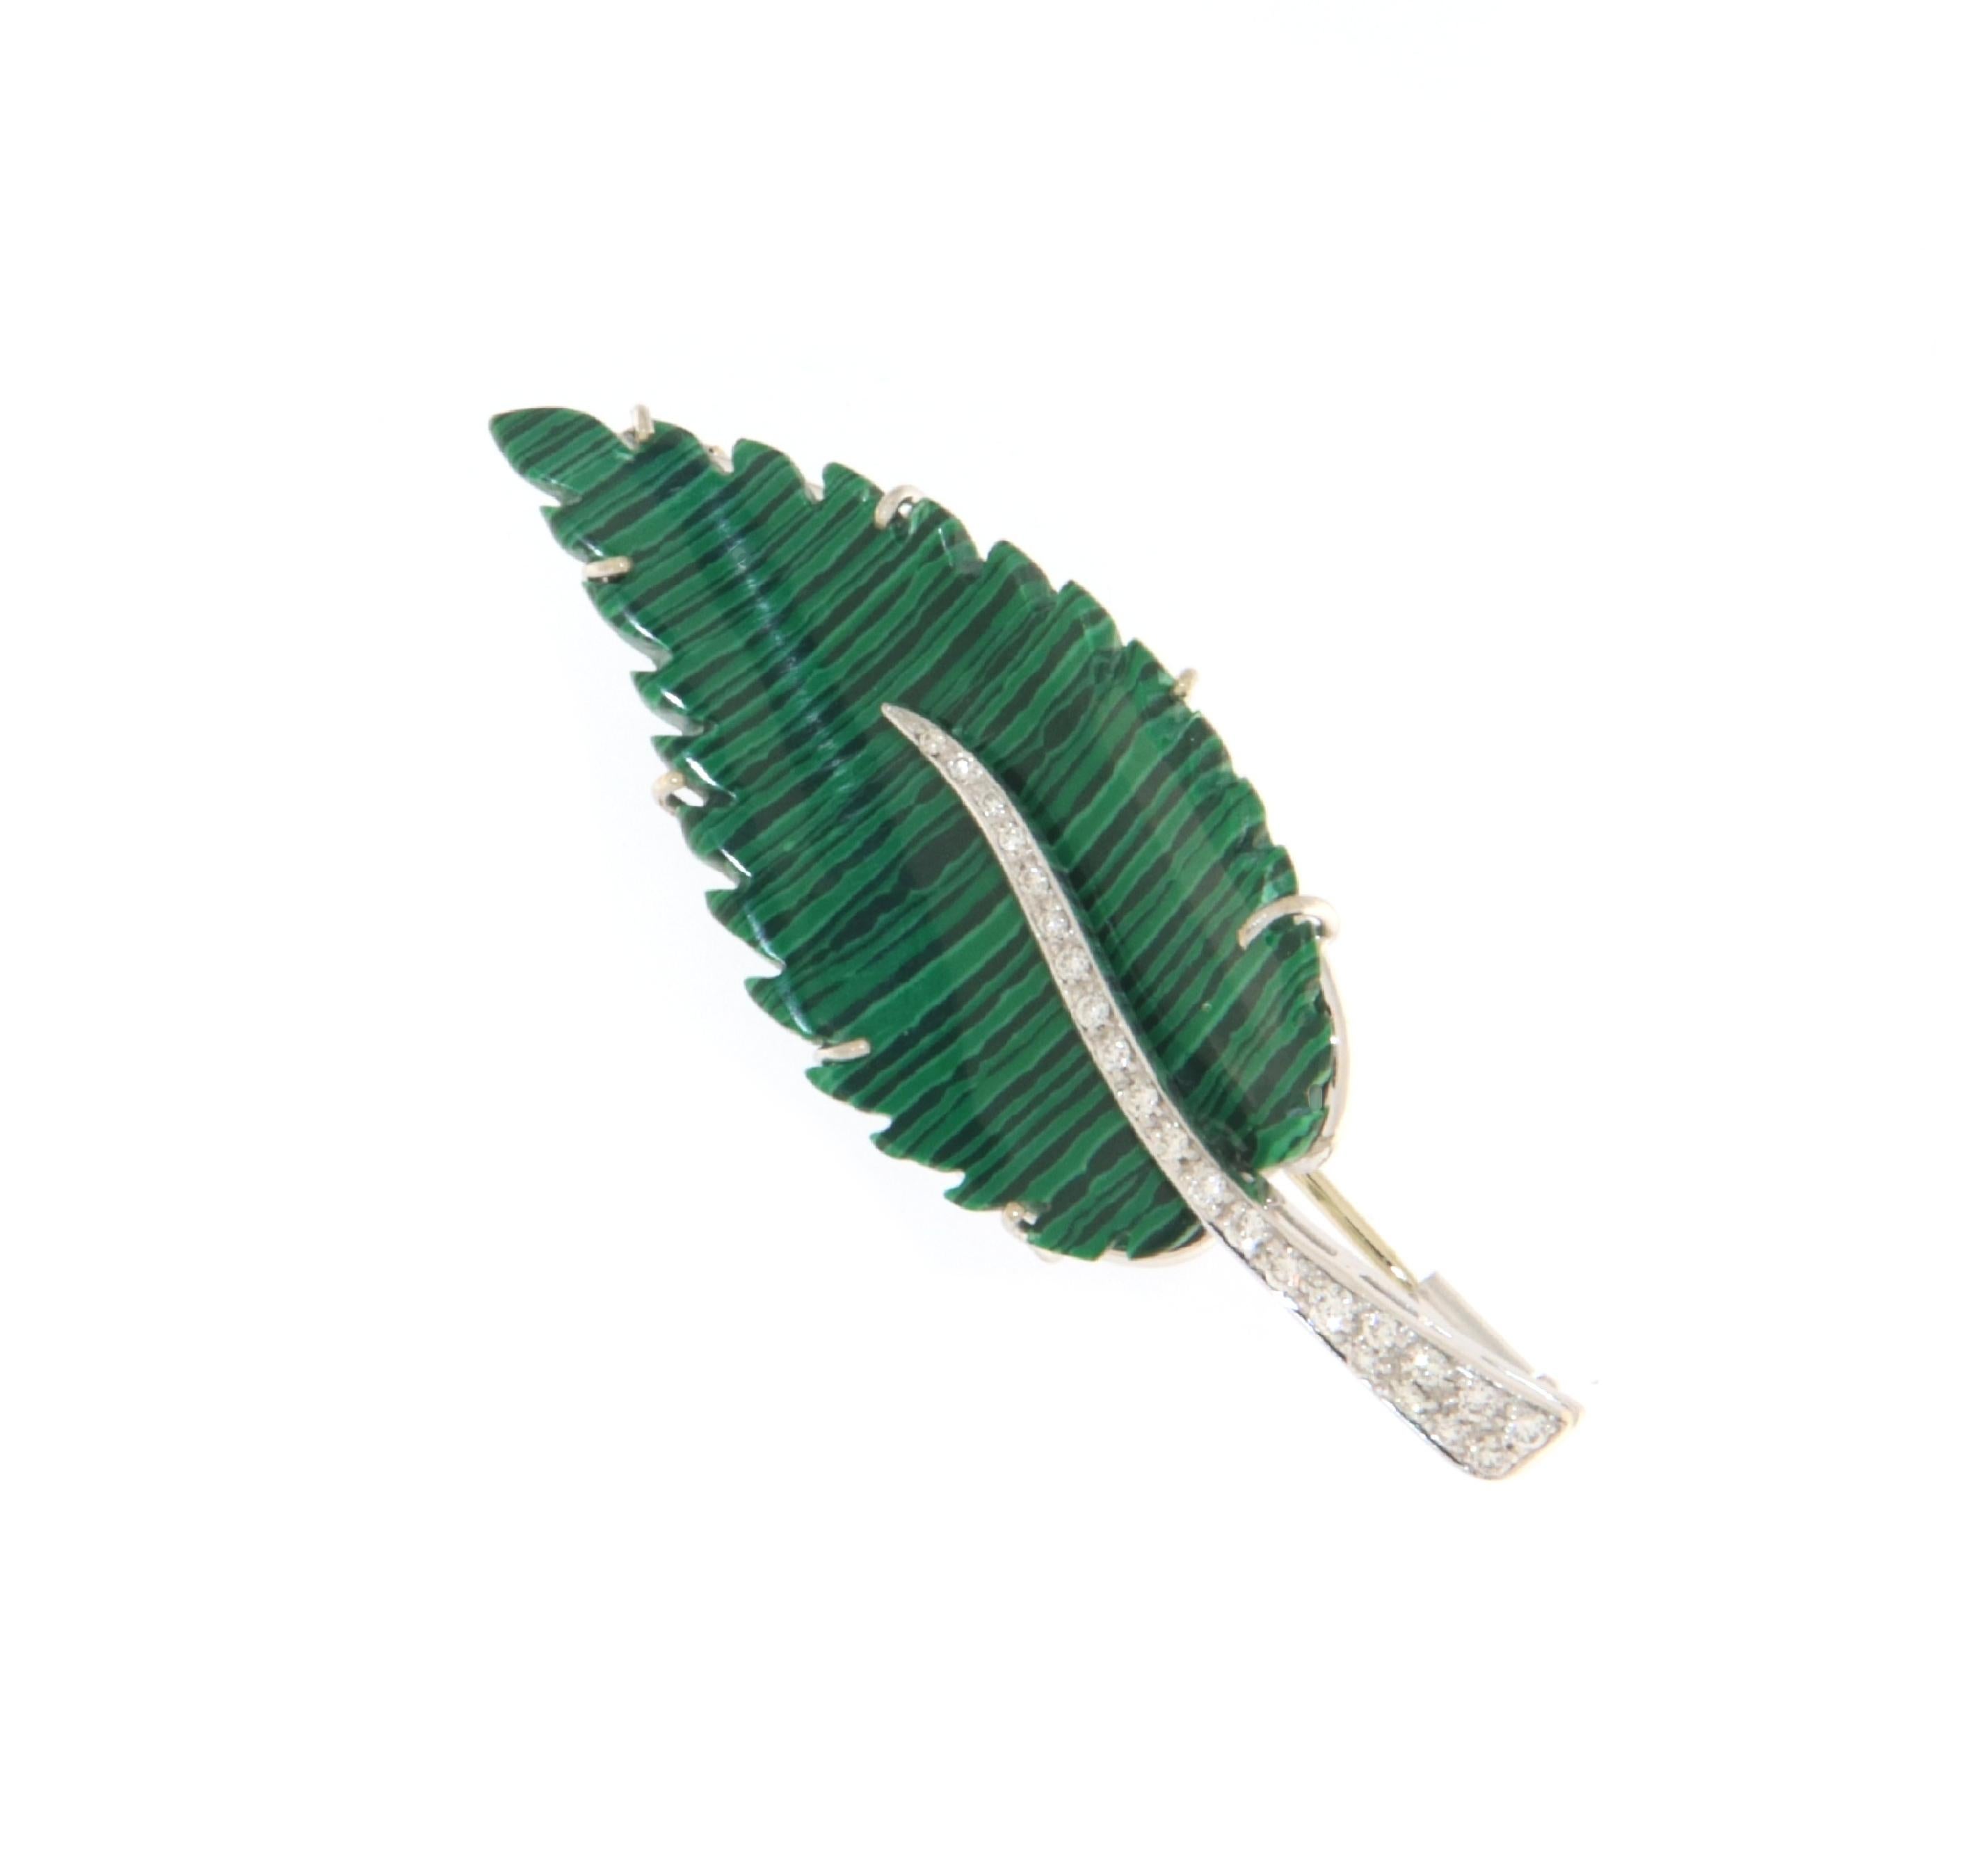 This exquisite brooch, crafted from 18-karat white gold and set with the striking beauty of malachite, offers a vivid portrayal of nature's artistry combined with luxurious elements. Shaped as a delicate leaf, the brooch captures the essence of